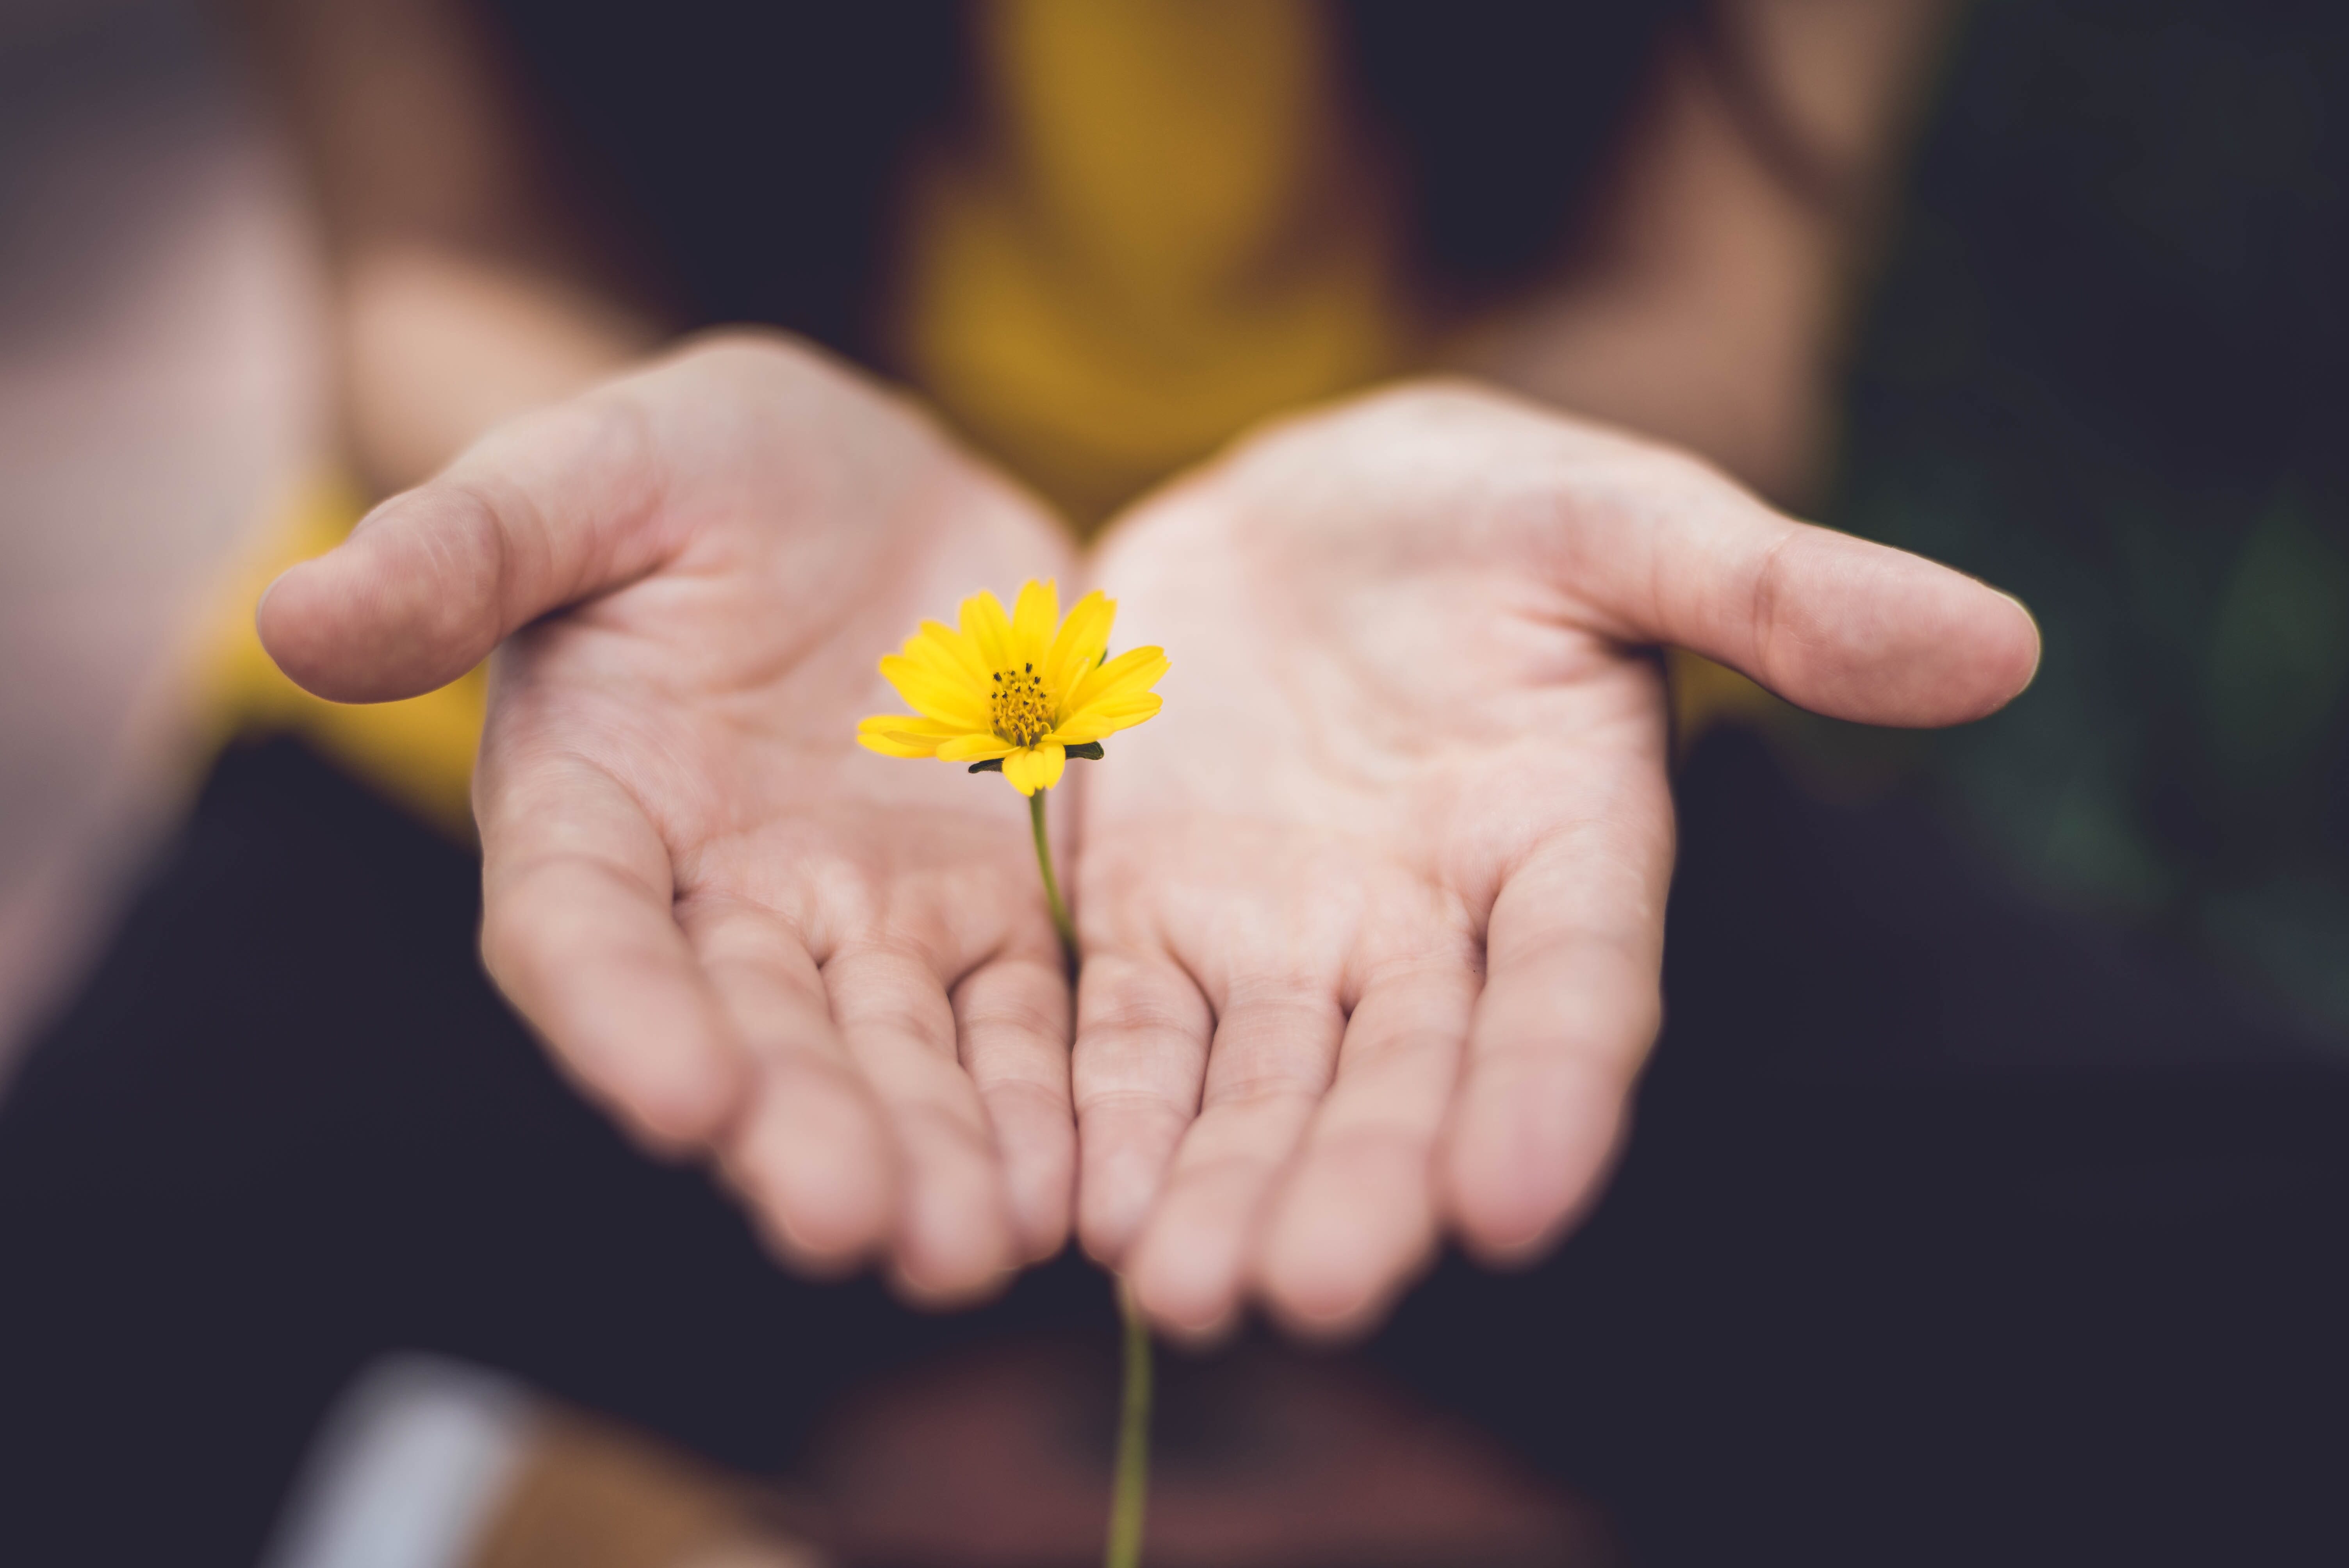 woman holding small yellow flower in her hands